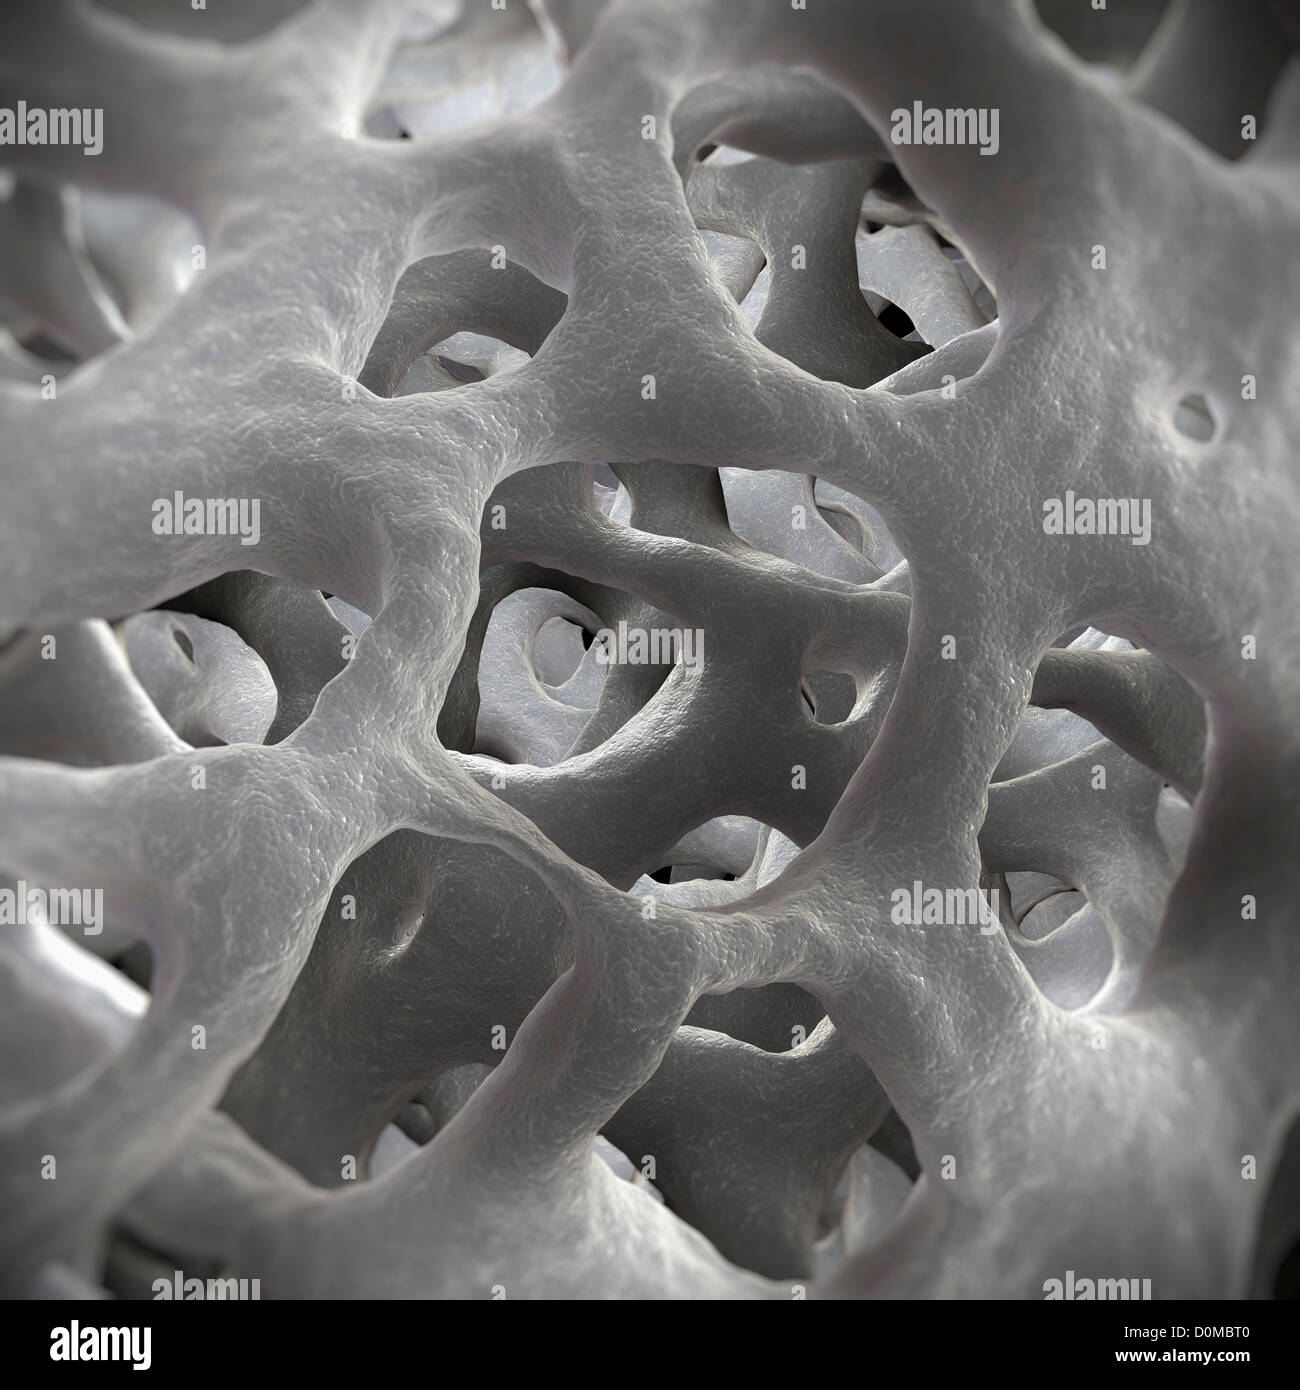 Perforated formations of cancellous or 'spongy' bone. Stock Photo